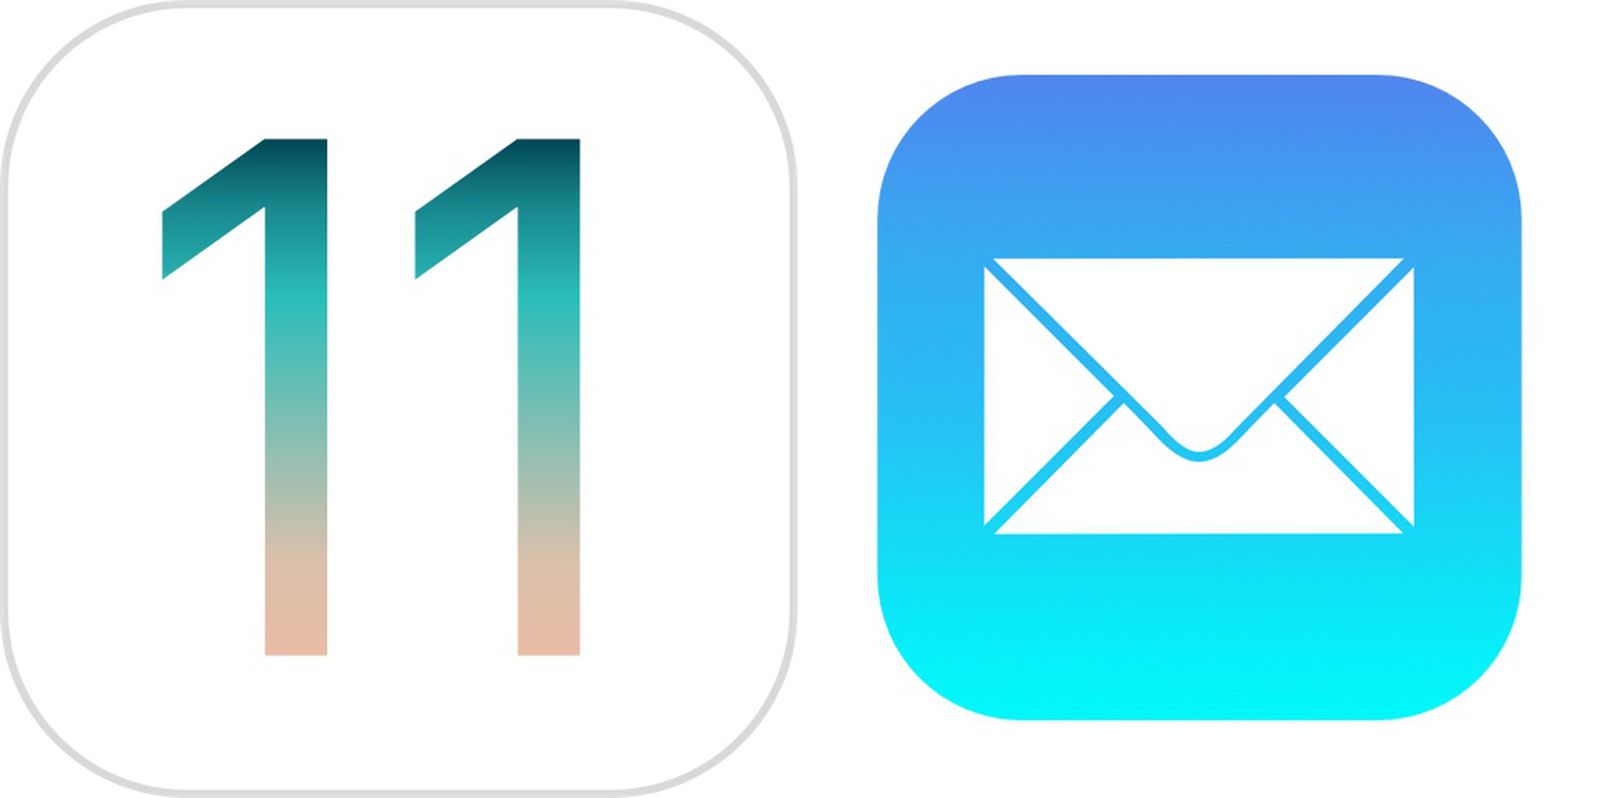 Apple, Microsoft Working to Fix iOS 11 Mail App Issues With Outlook.com, Office 365 & Exchange Accounts